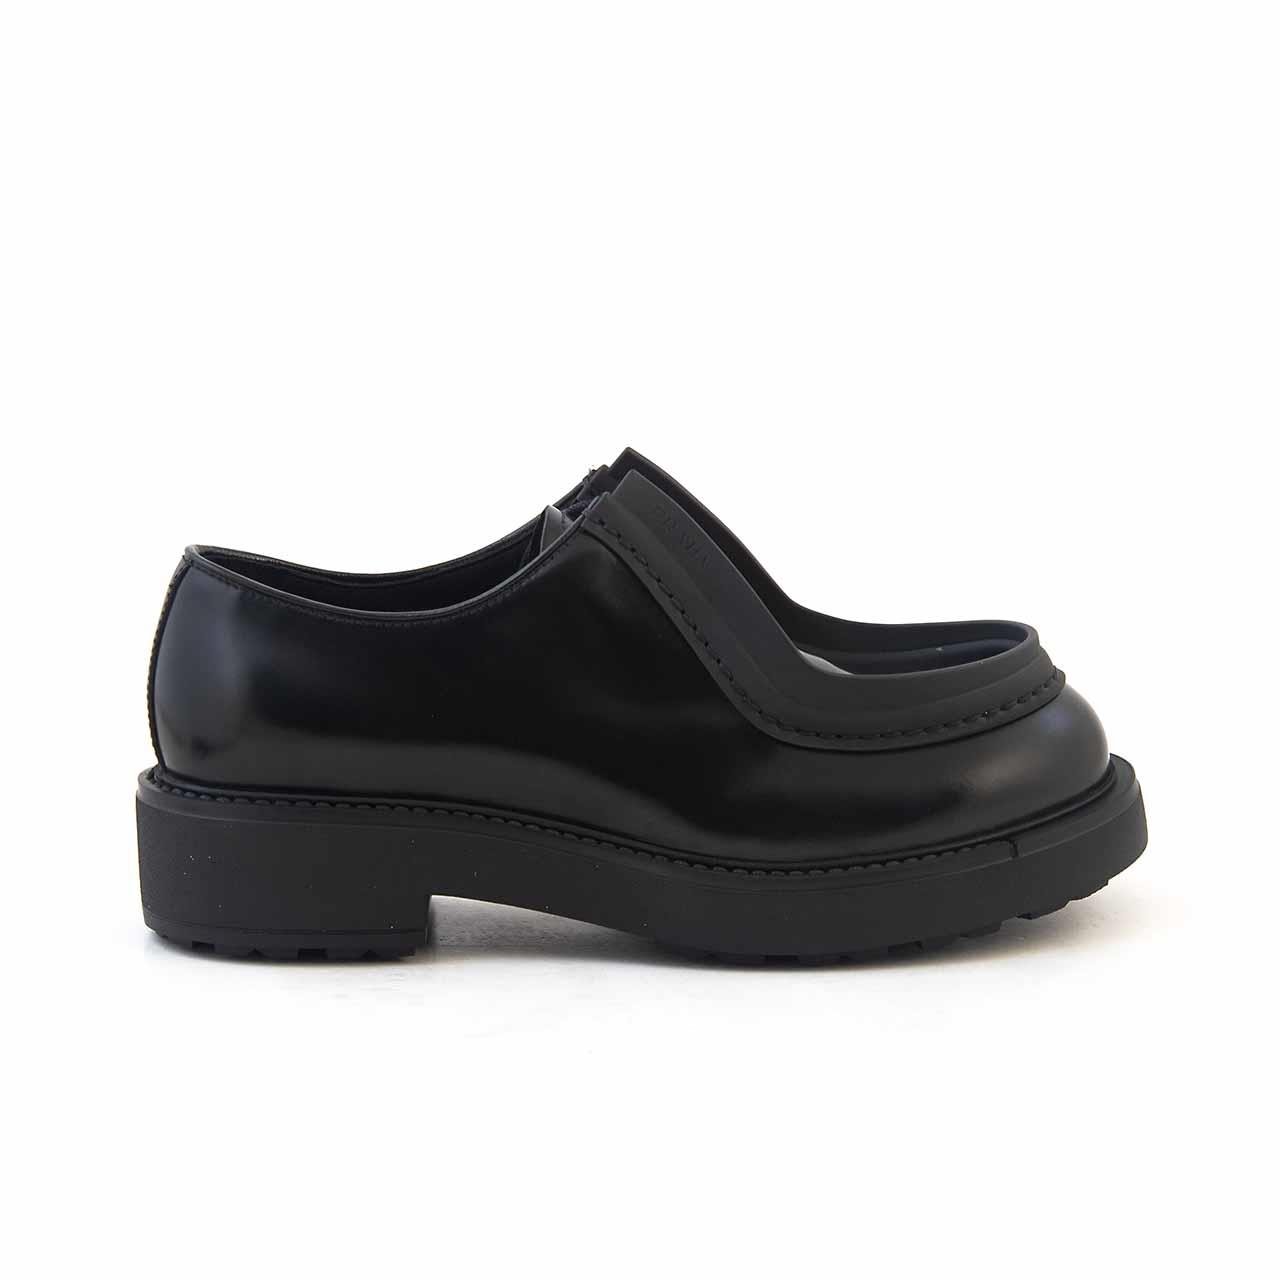 Prada Leather Men's Casual Shoes